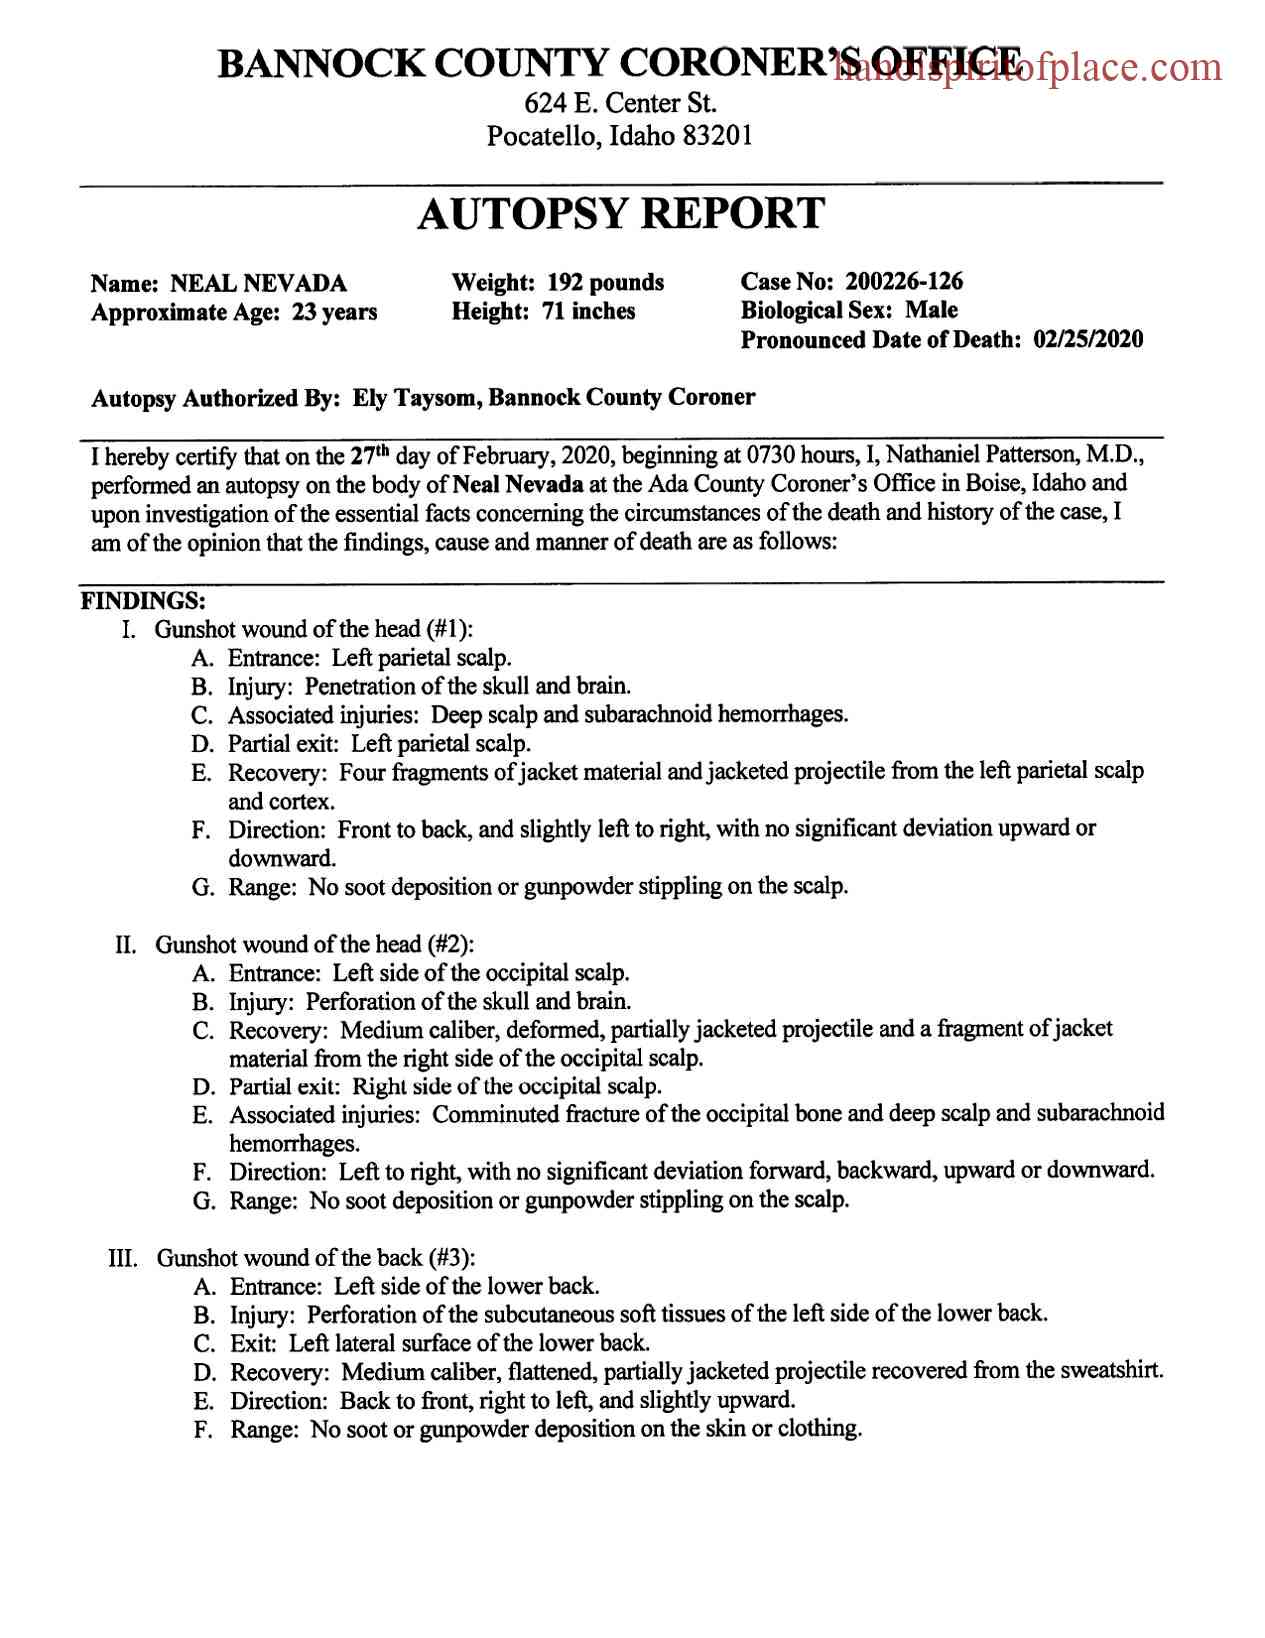 Importance of Autopsy Reports